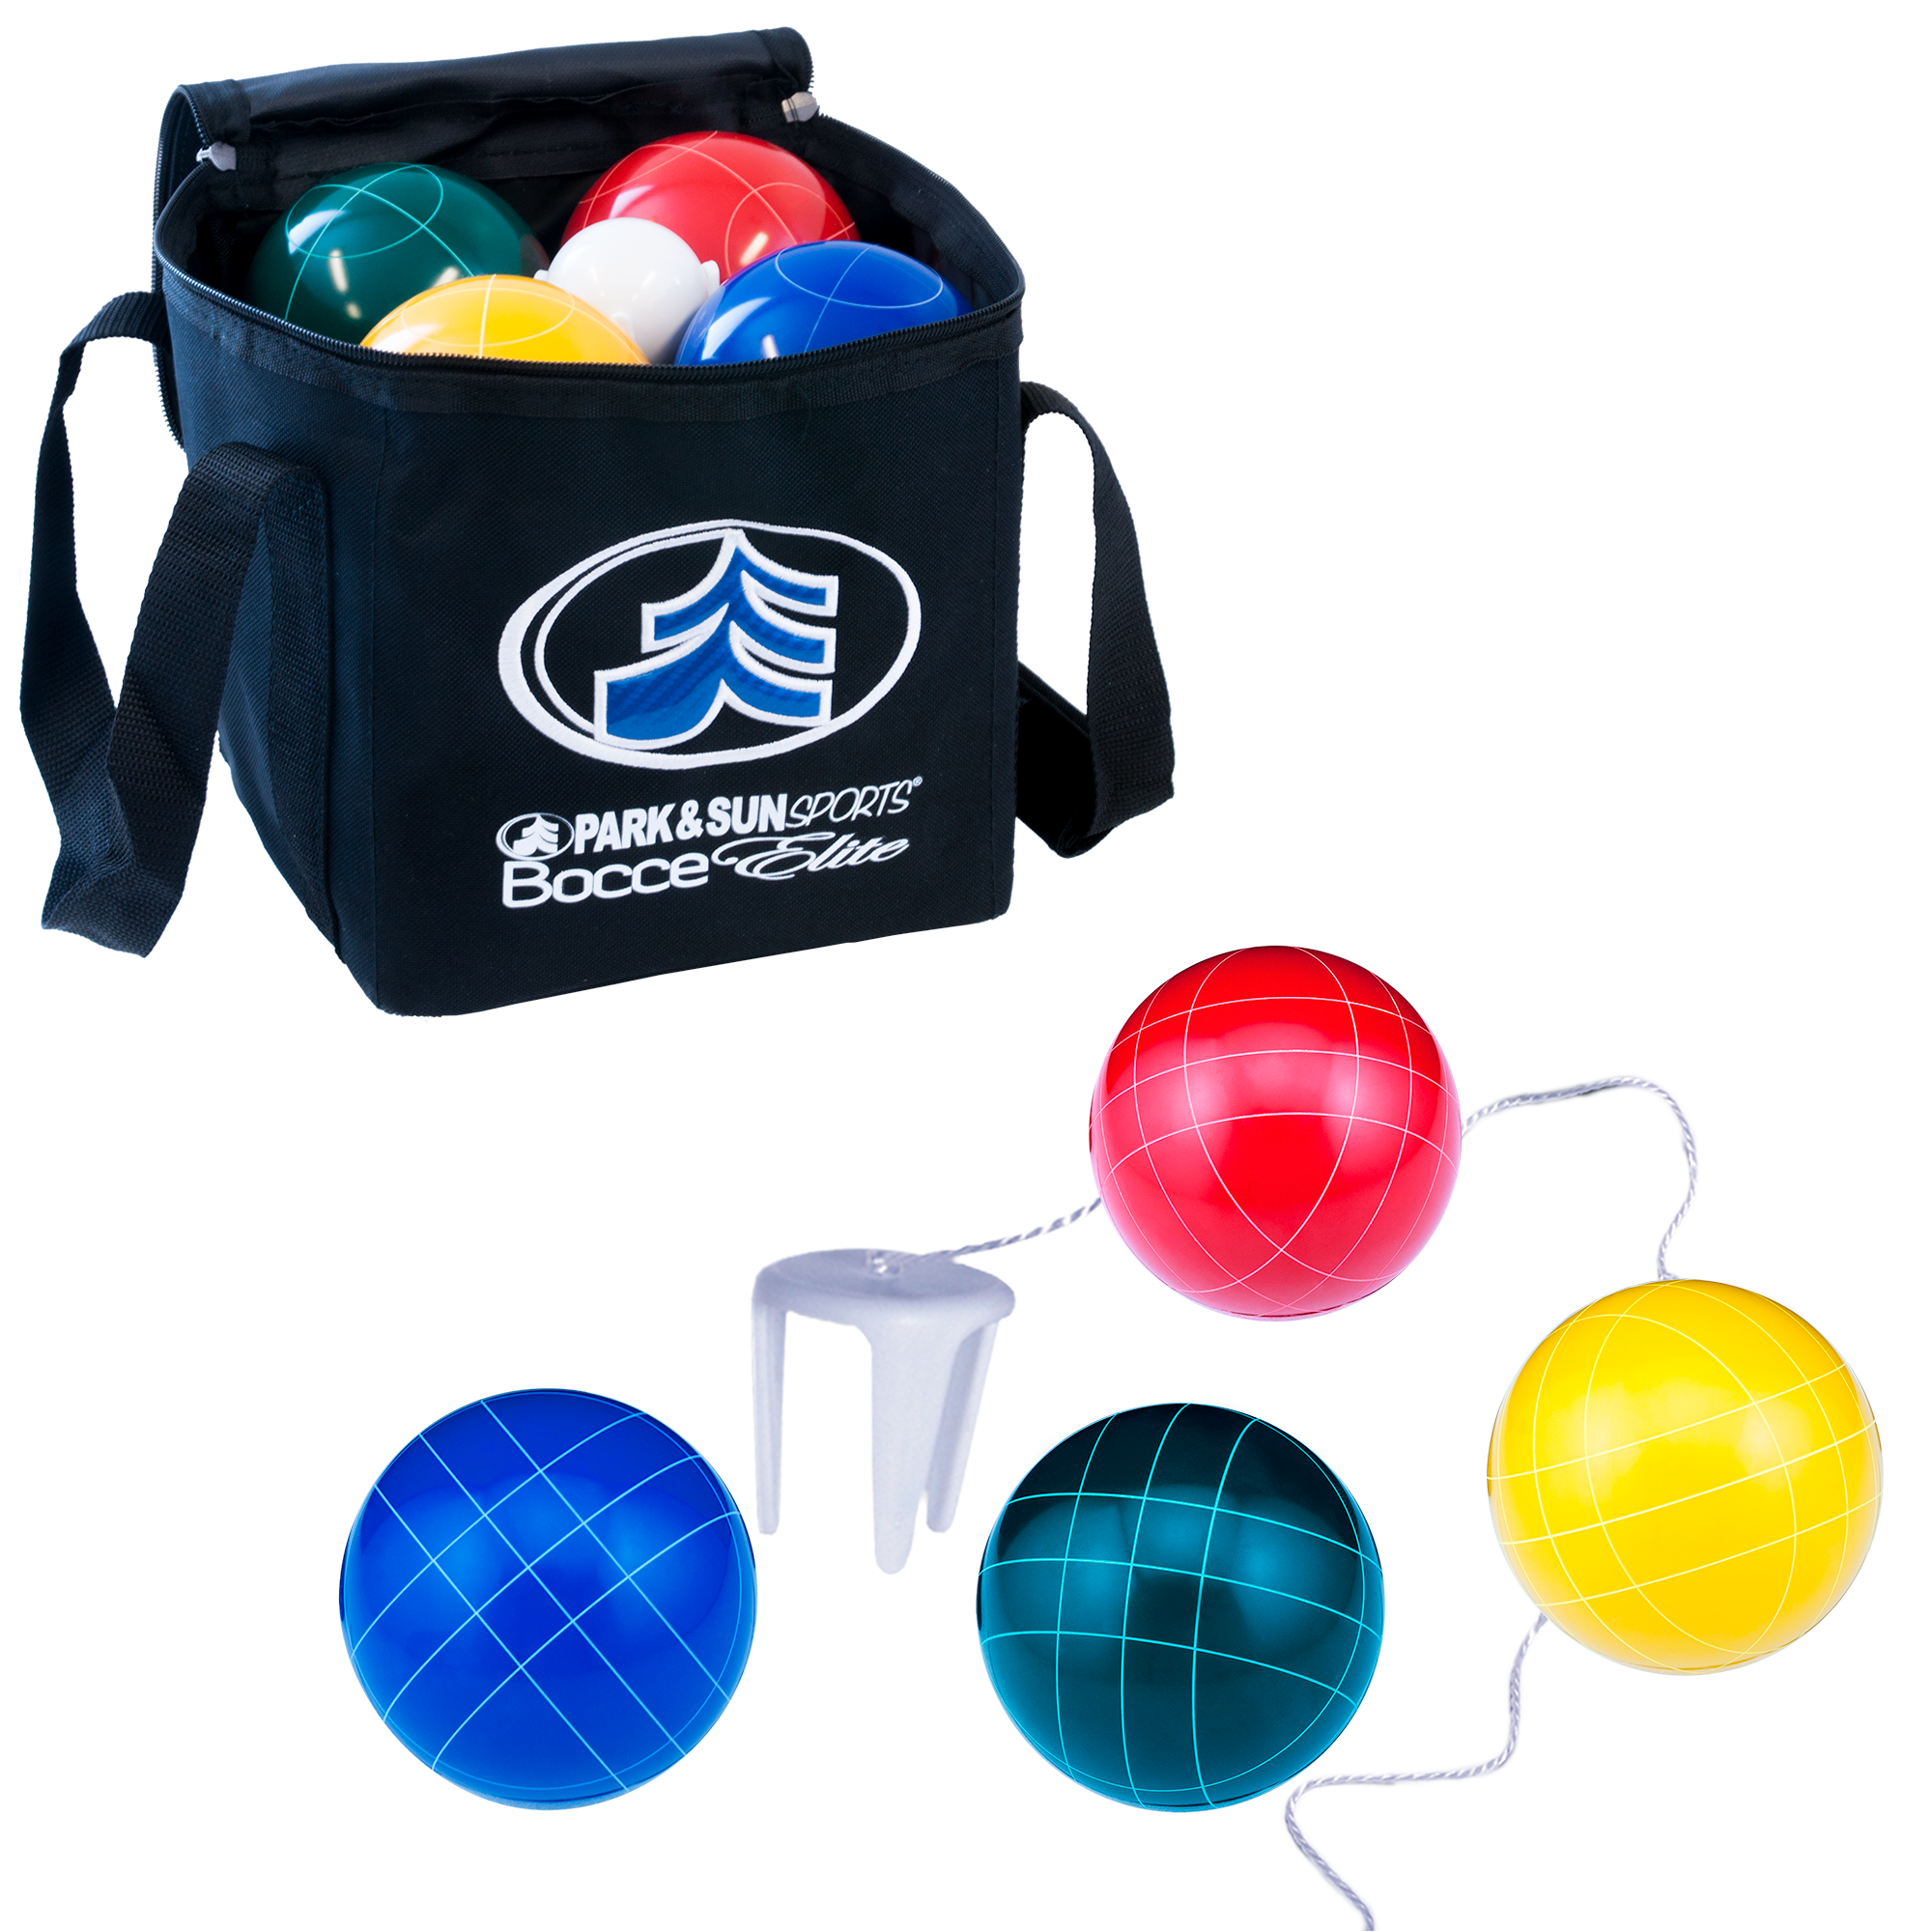 Outdoor Family Bocce Game for Backyard, Play Hey 80-76090 Bocce Ball Set 